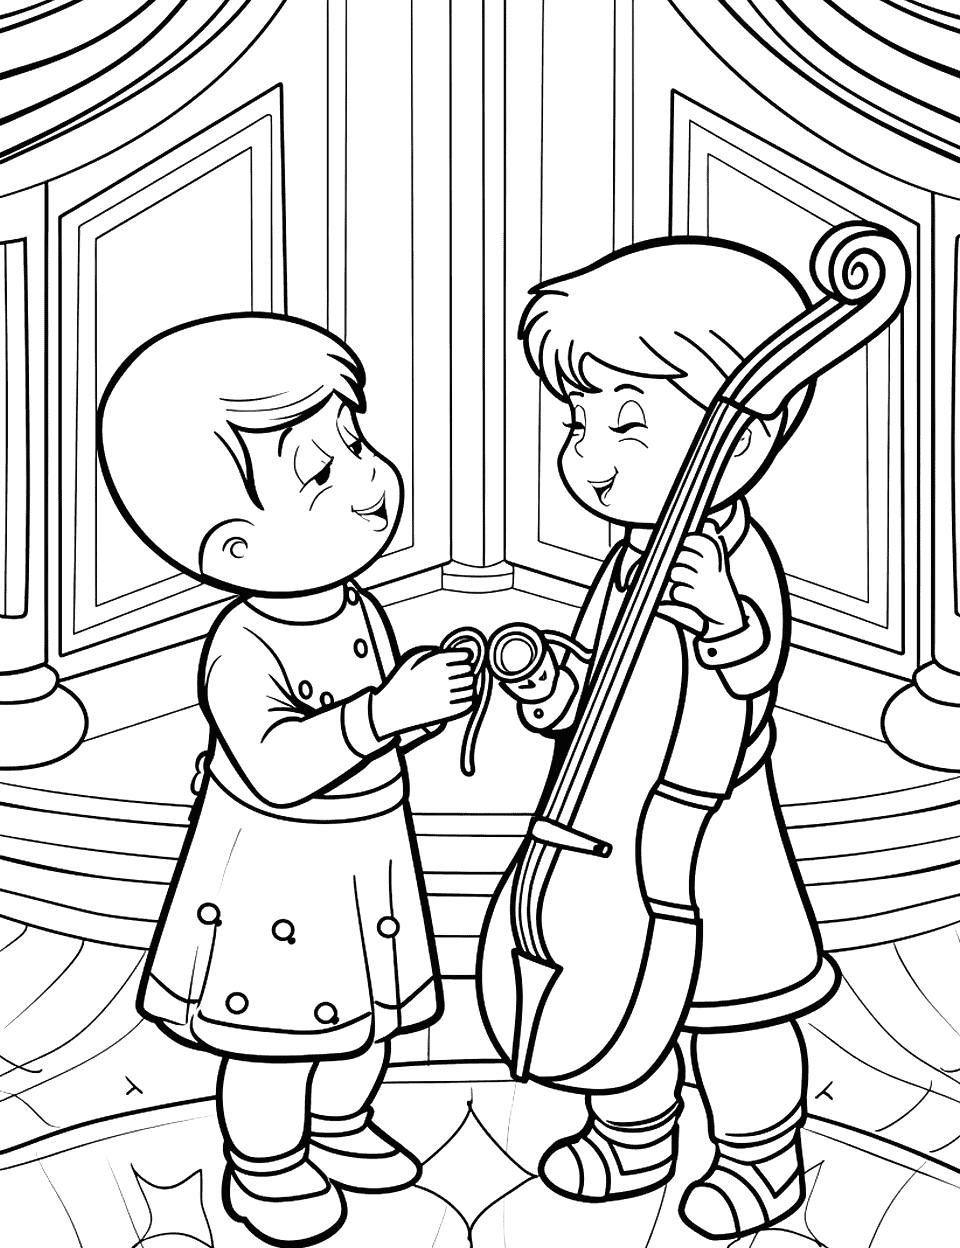 Opera at the Theater Music Coloring Page - Children dressed in fancy clothes, ready for the opera at a grand theater.